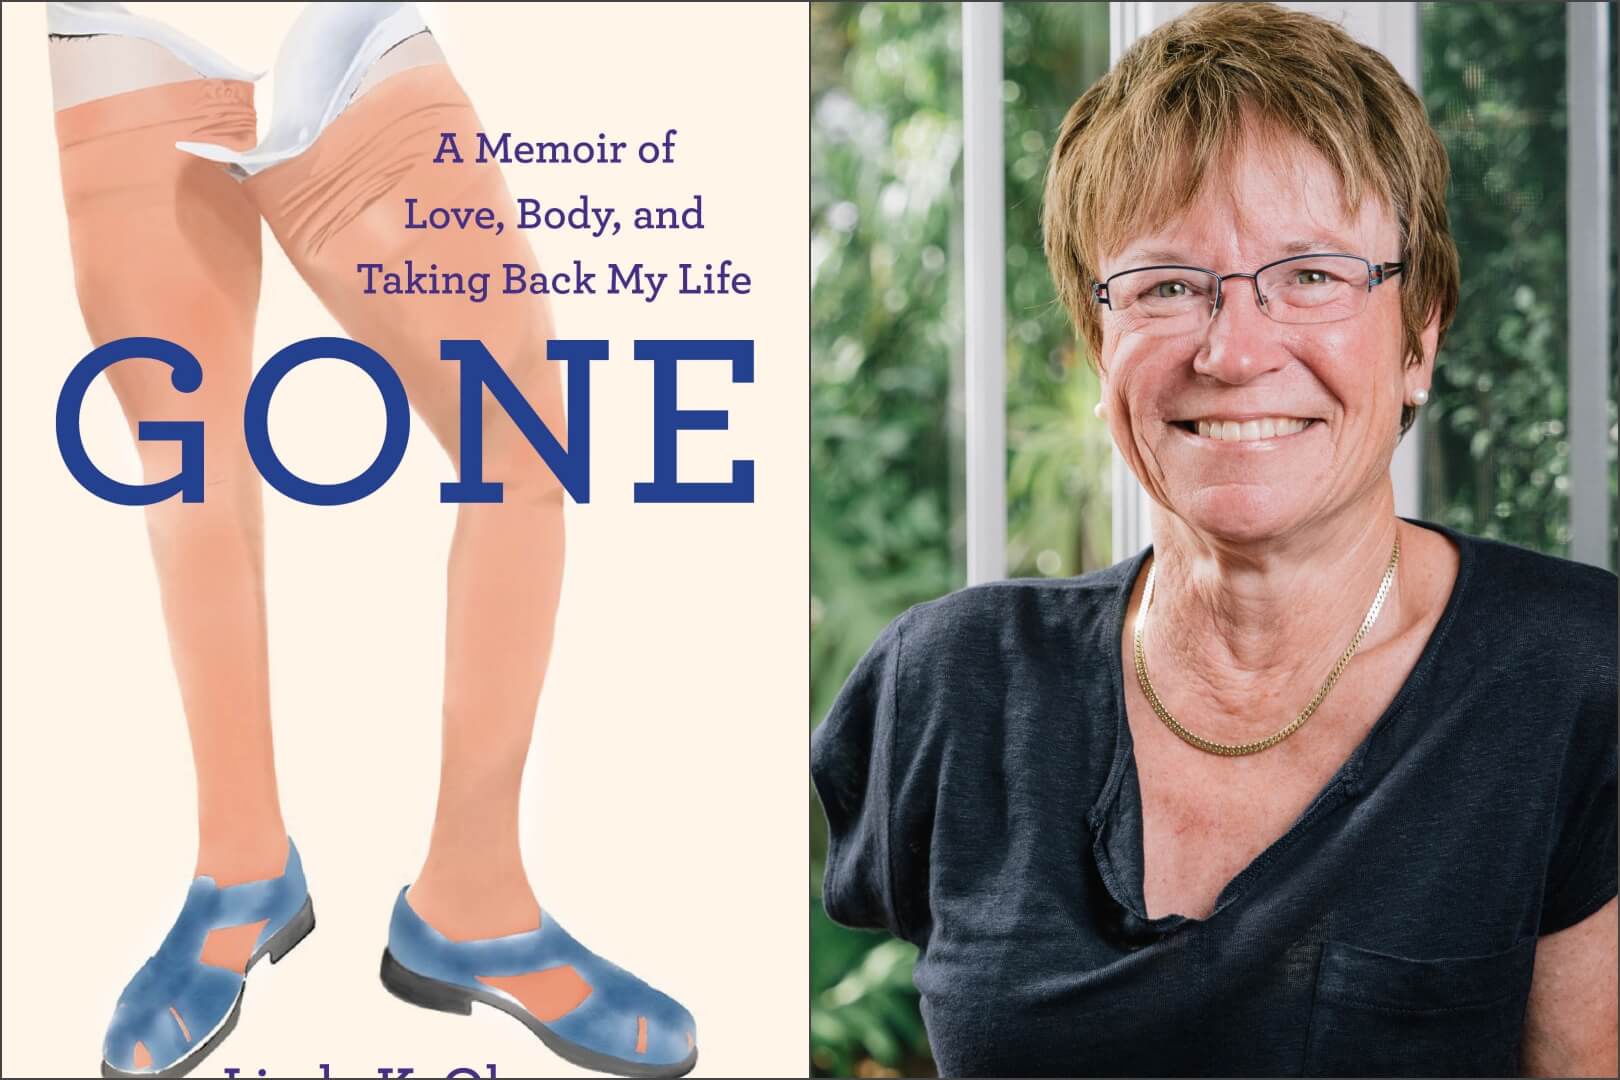 Q&A with Linda Olson, Author of Gone: A Memoir of Love, Body, and Taking Back My Life